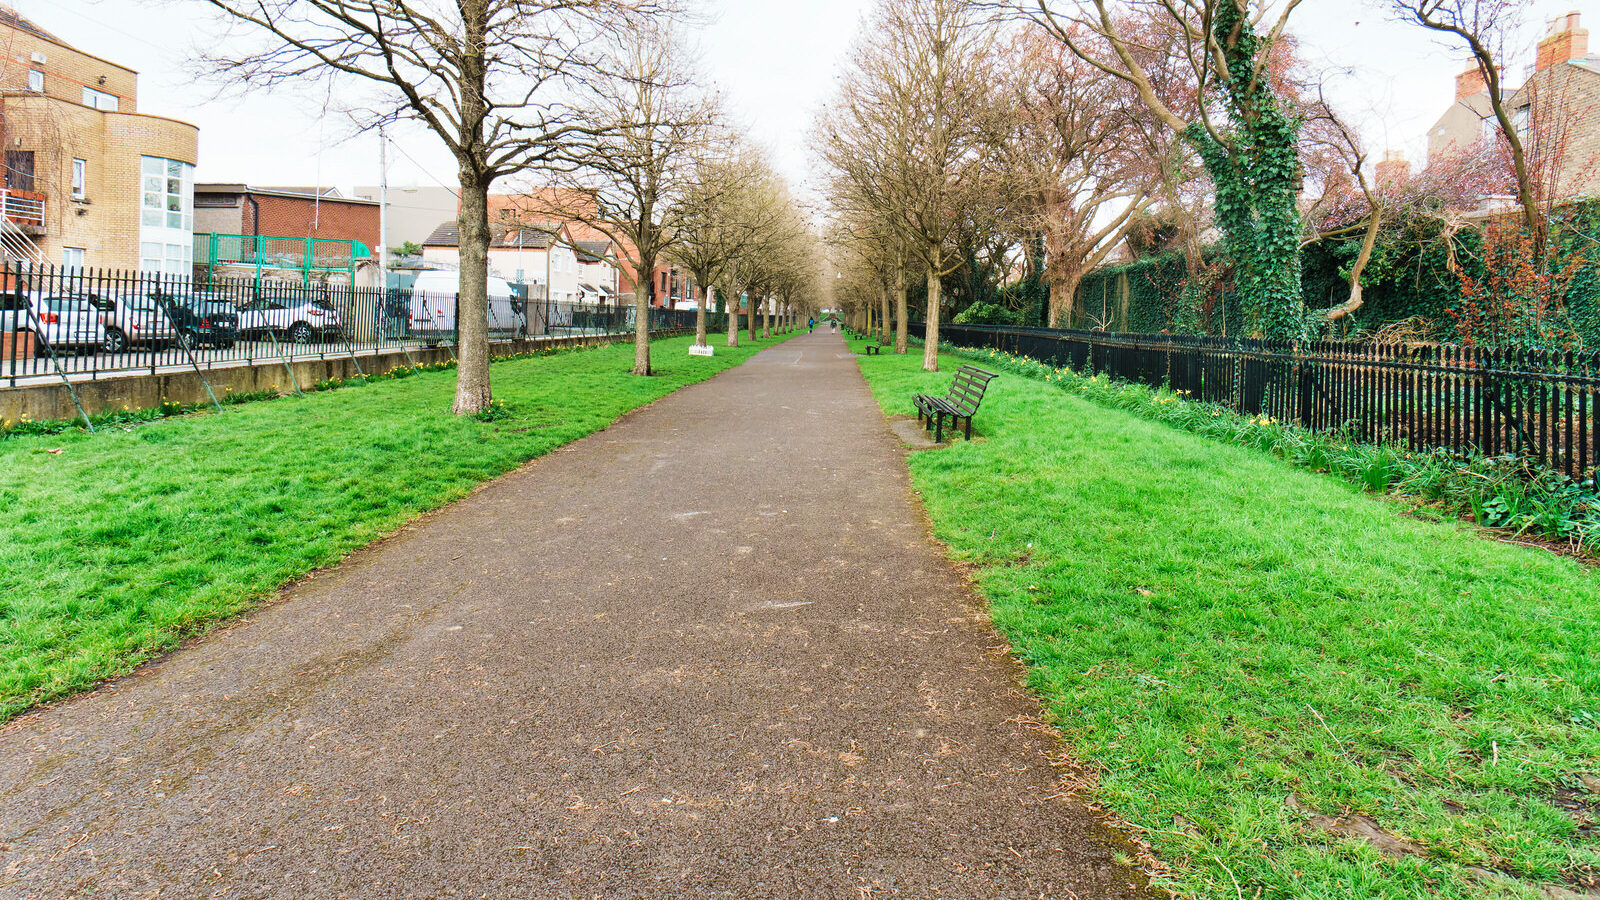 THE ROYAL CANAL WALK LINEAR PARK [FEATURING A 1916 EASTER RISING MEMORIAL]-229544-1